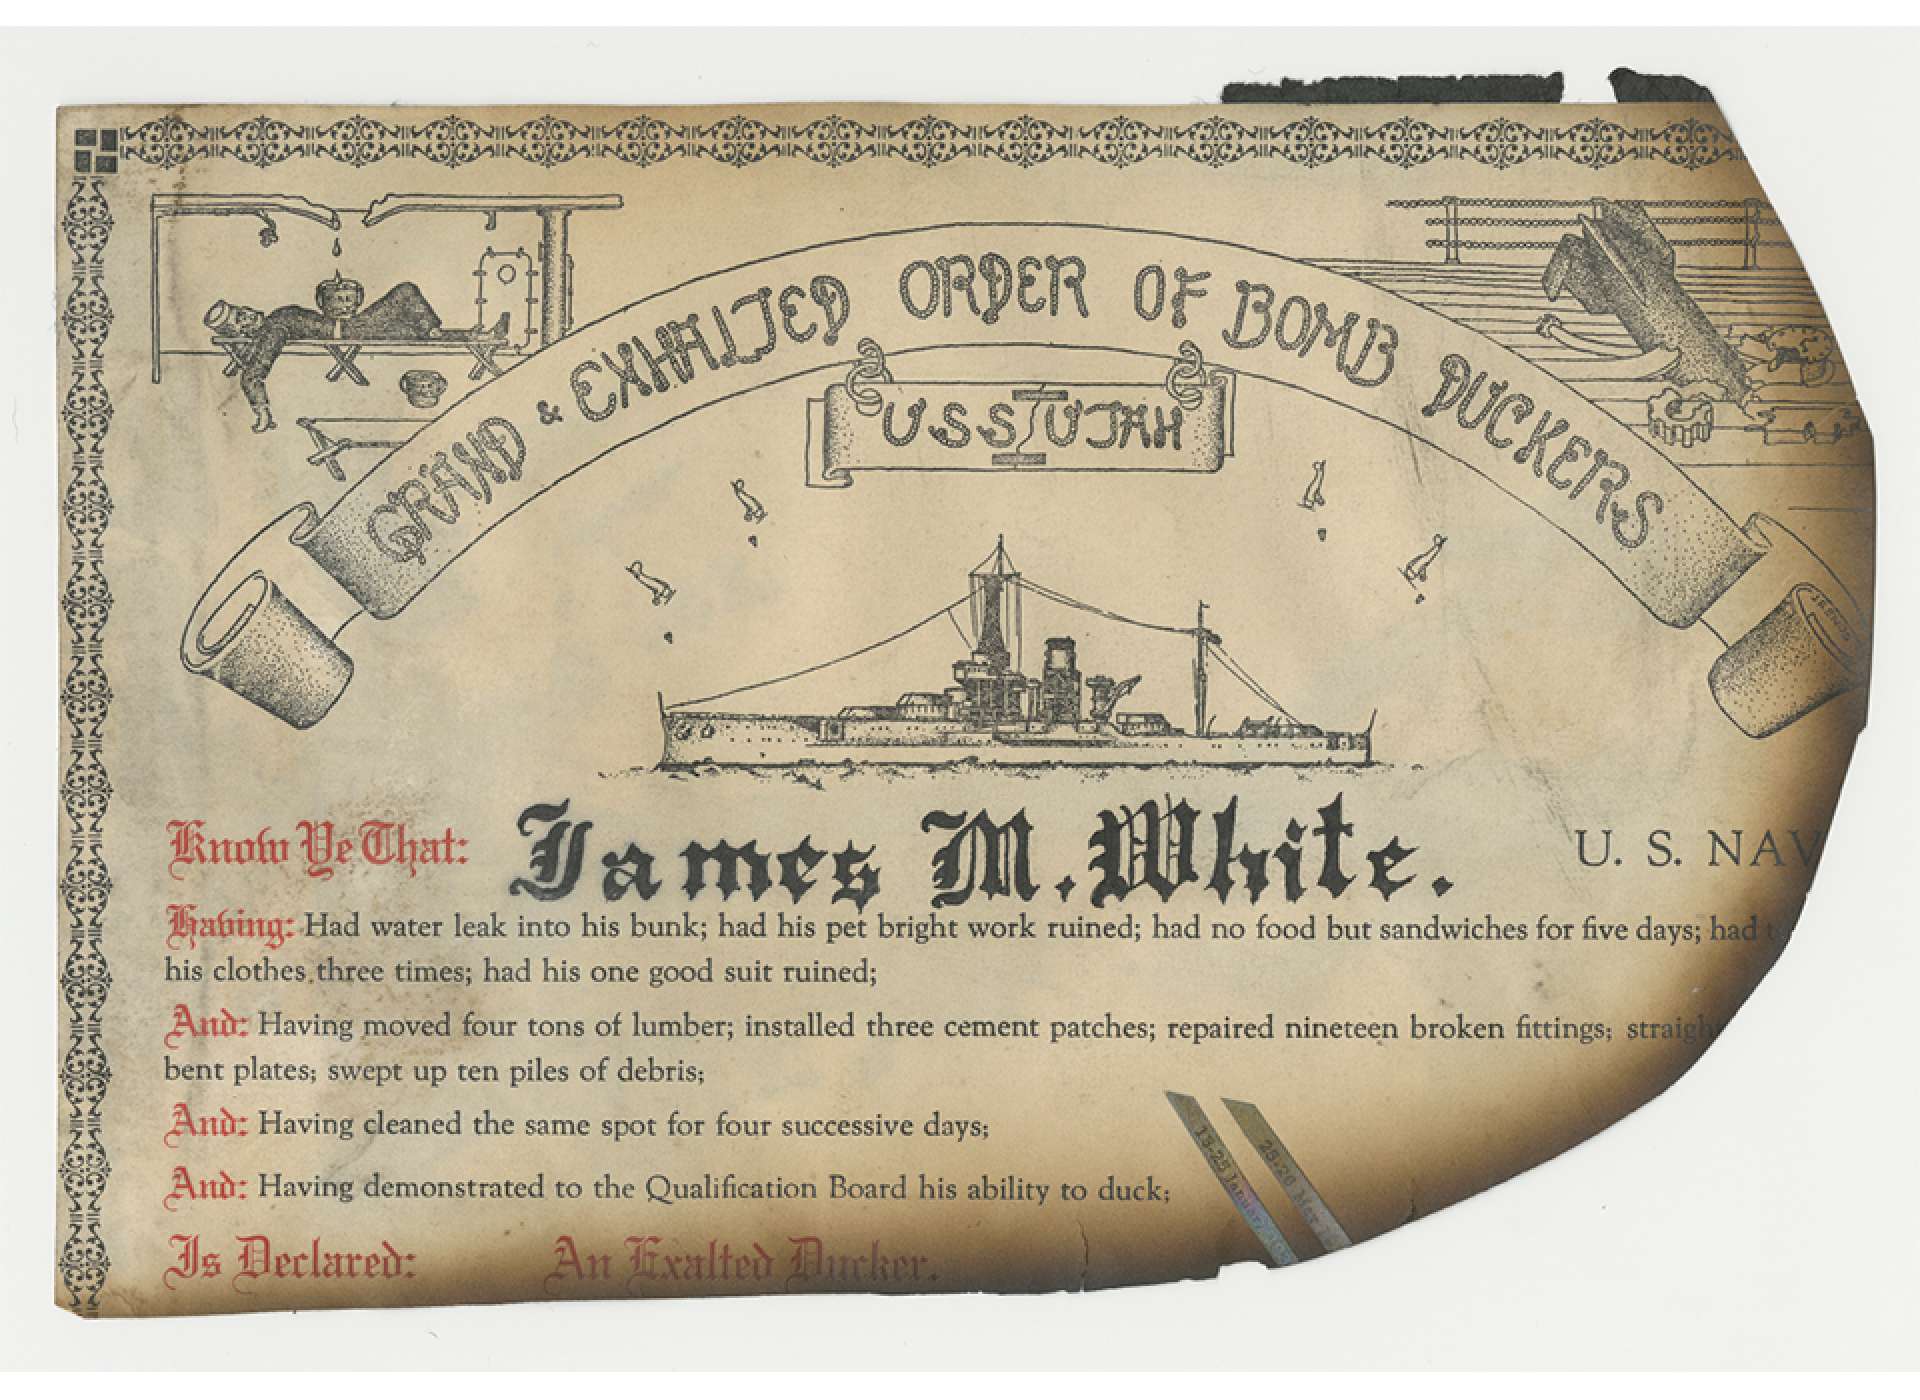 James White’s damaged Bomb Duckers certificate